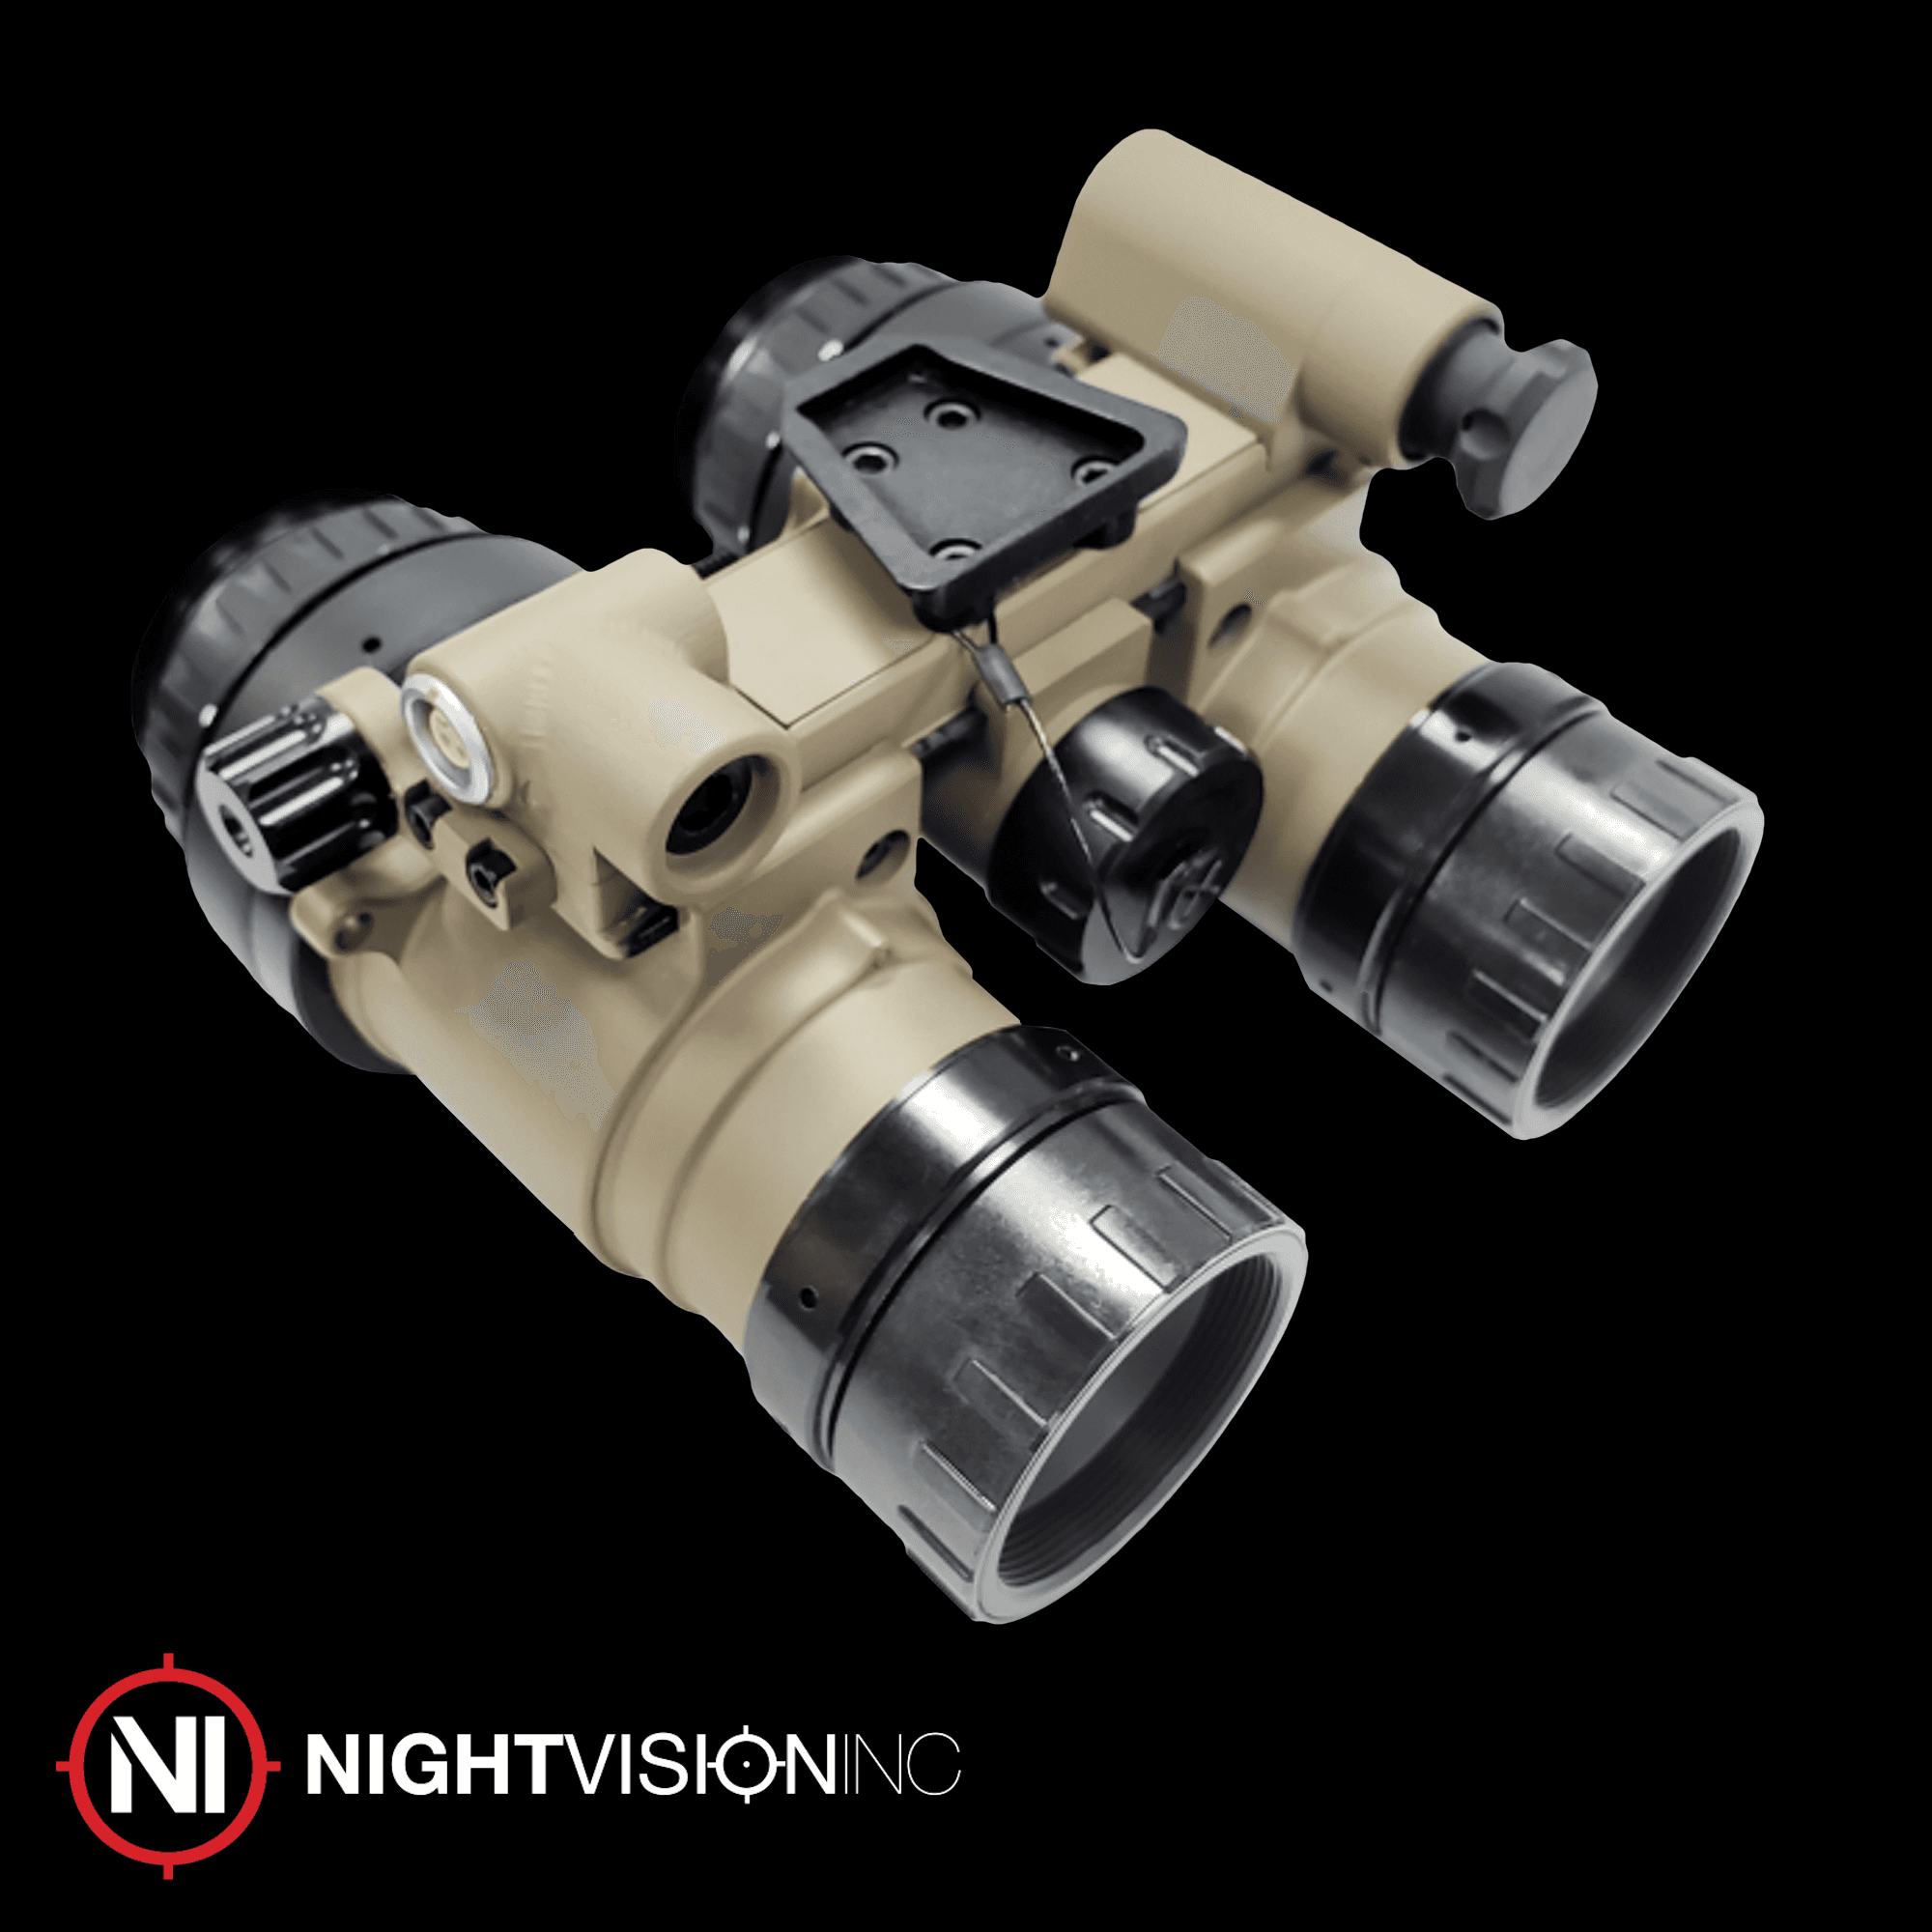 Product READY TO SHIP | RNVG - Night Vision Inc. image